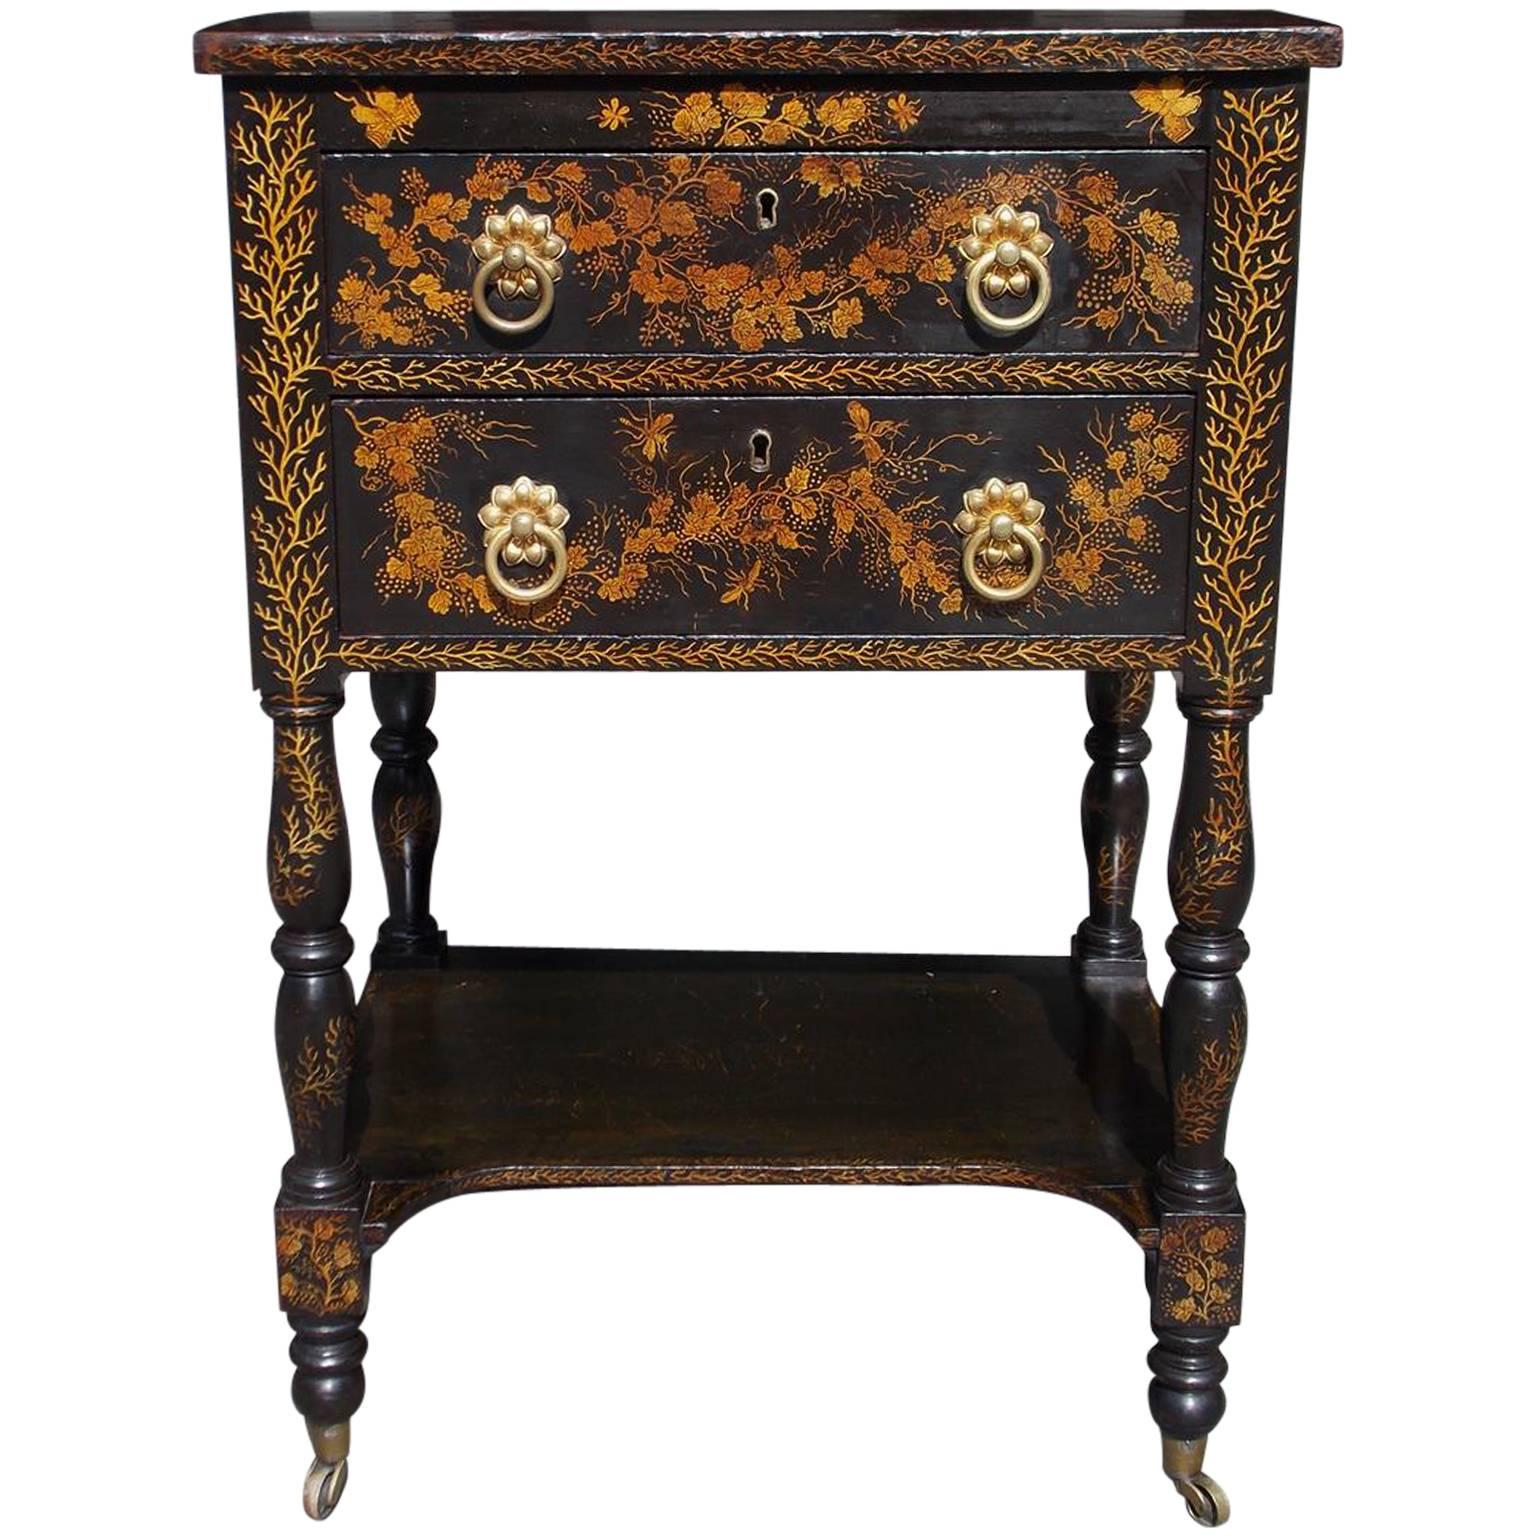 Fine American Black Lacquered & Japanned Stand, New York, Circa 1815